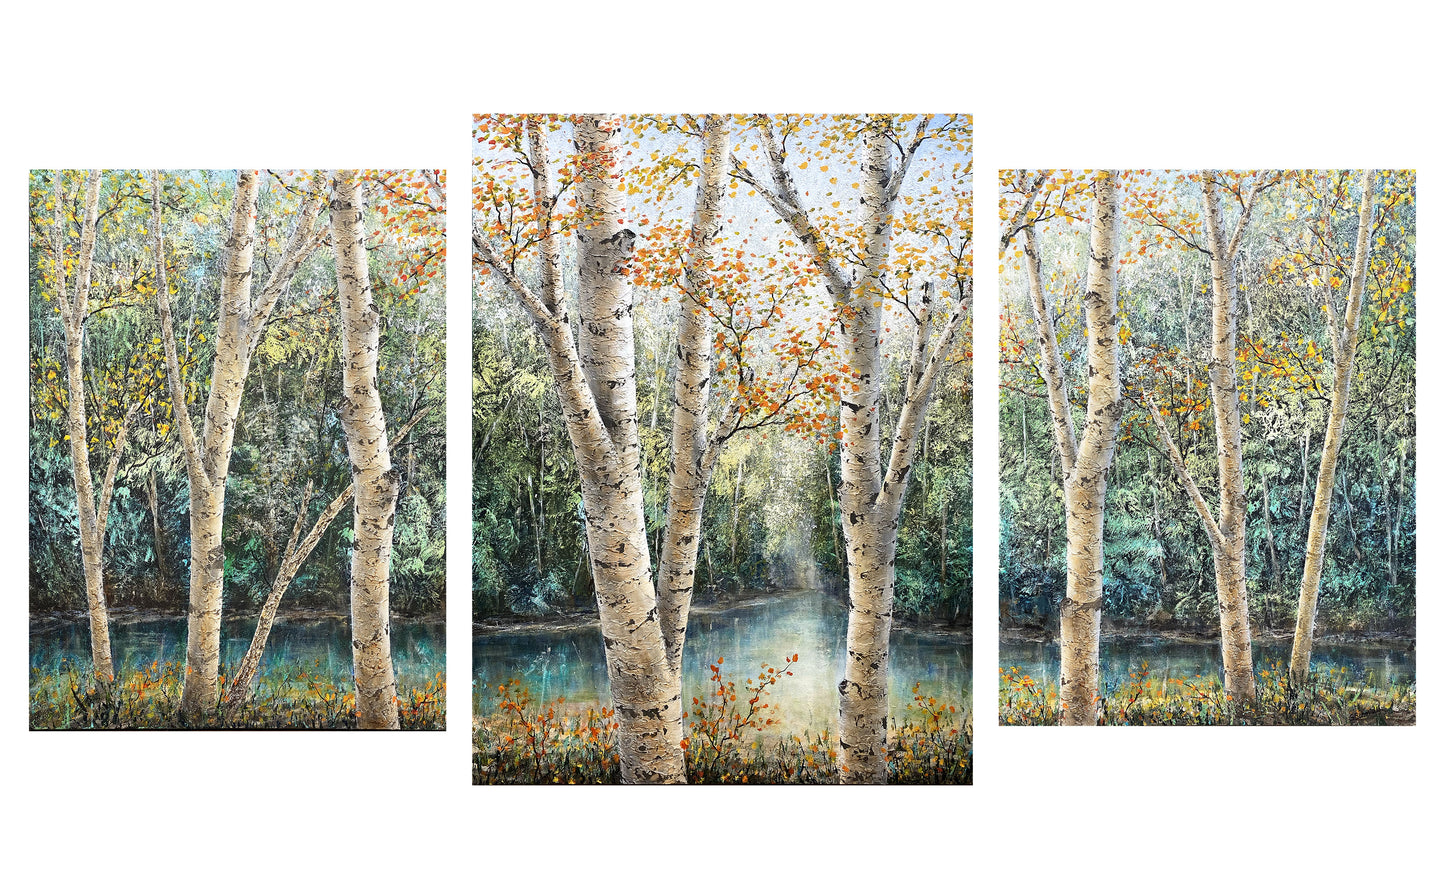 A stunning original painting of birch trees and a woodland pond by Gerd Schmidt that showcases the beauty of quiet forest scenery.